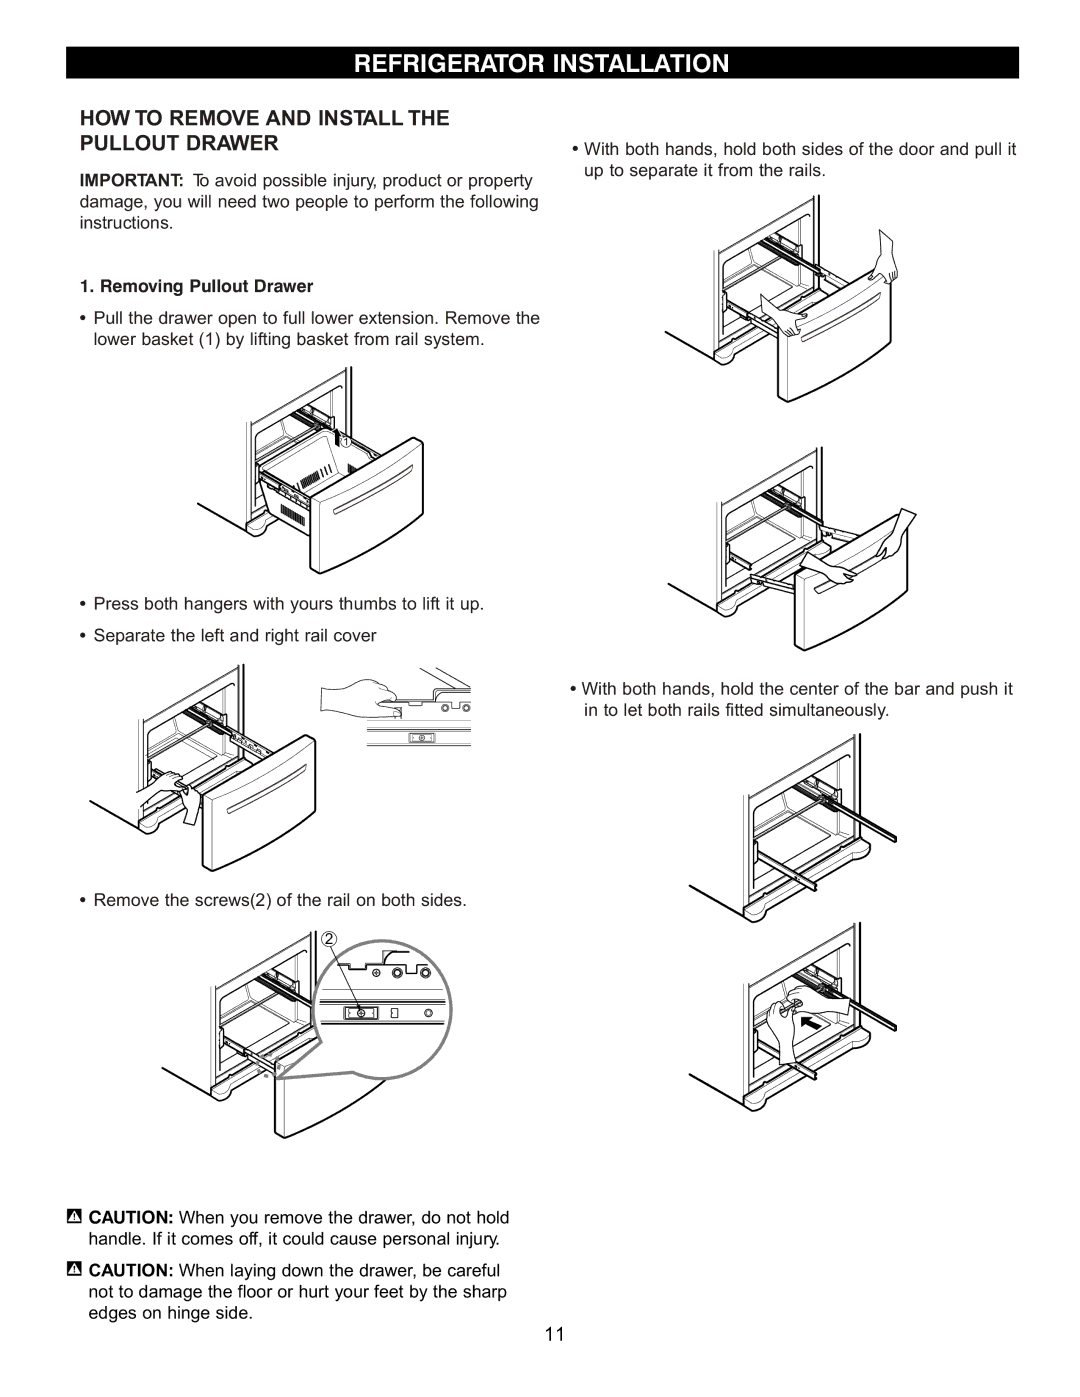 LG Electronics LFC20760 owner manual HOW to Remove and Install Pullout Drawer, Removing Pullout Drawer 